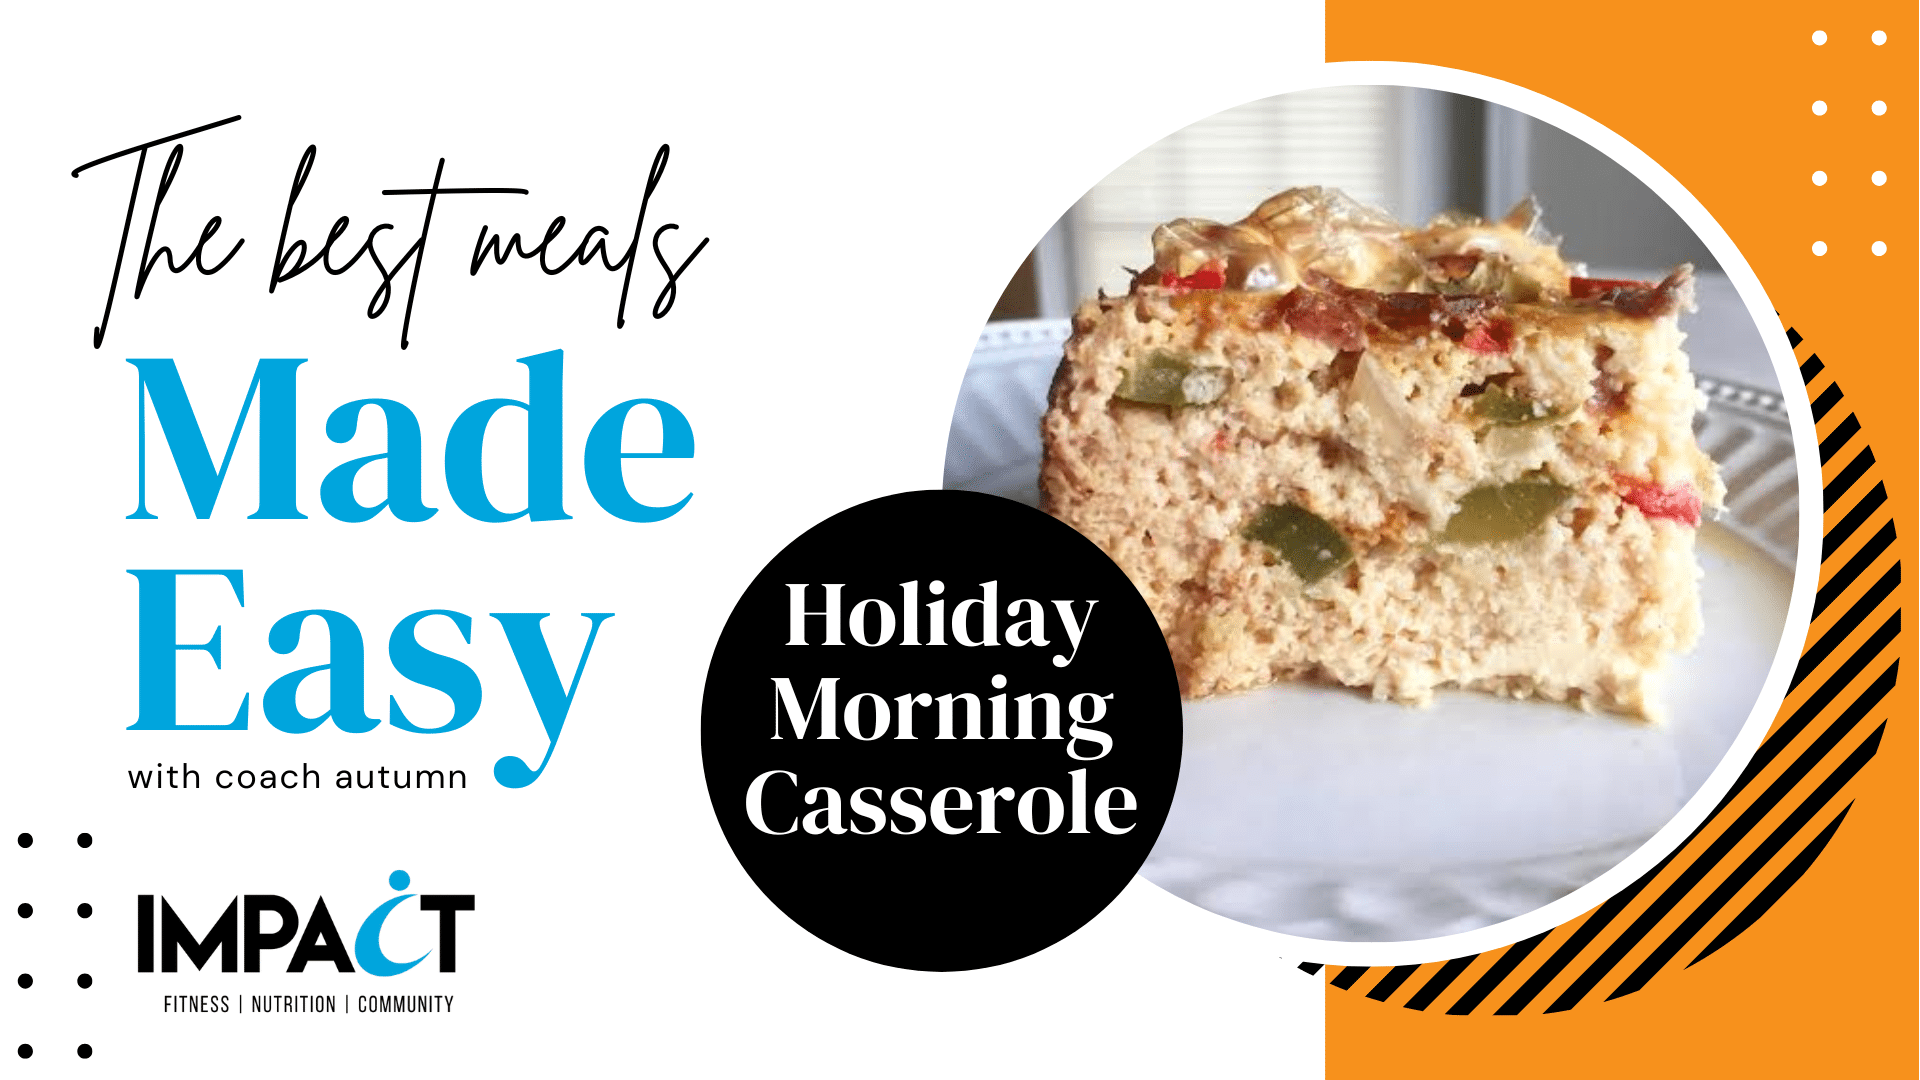 Crockpot Breakfast Casserole - Dinners, Dishes, and Desserts